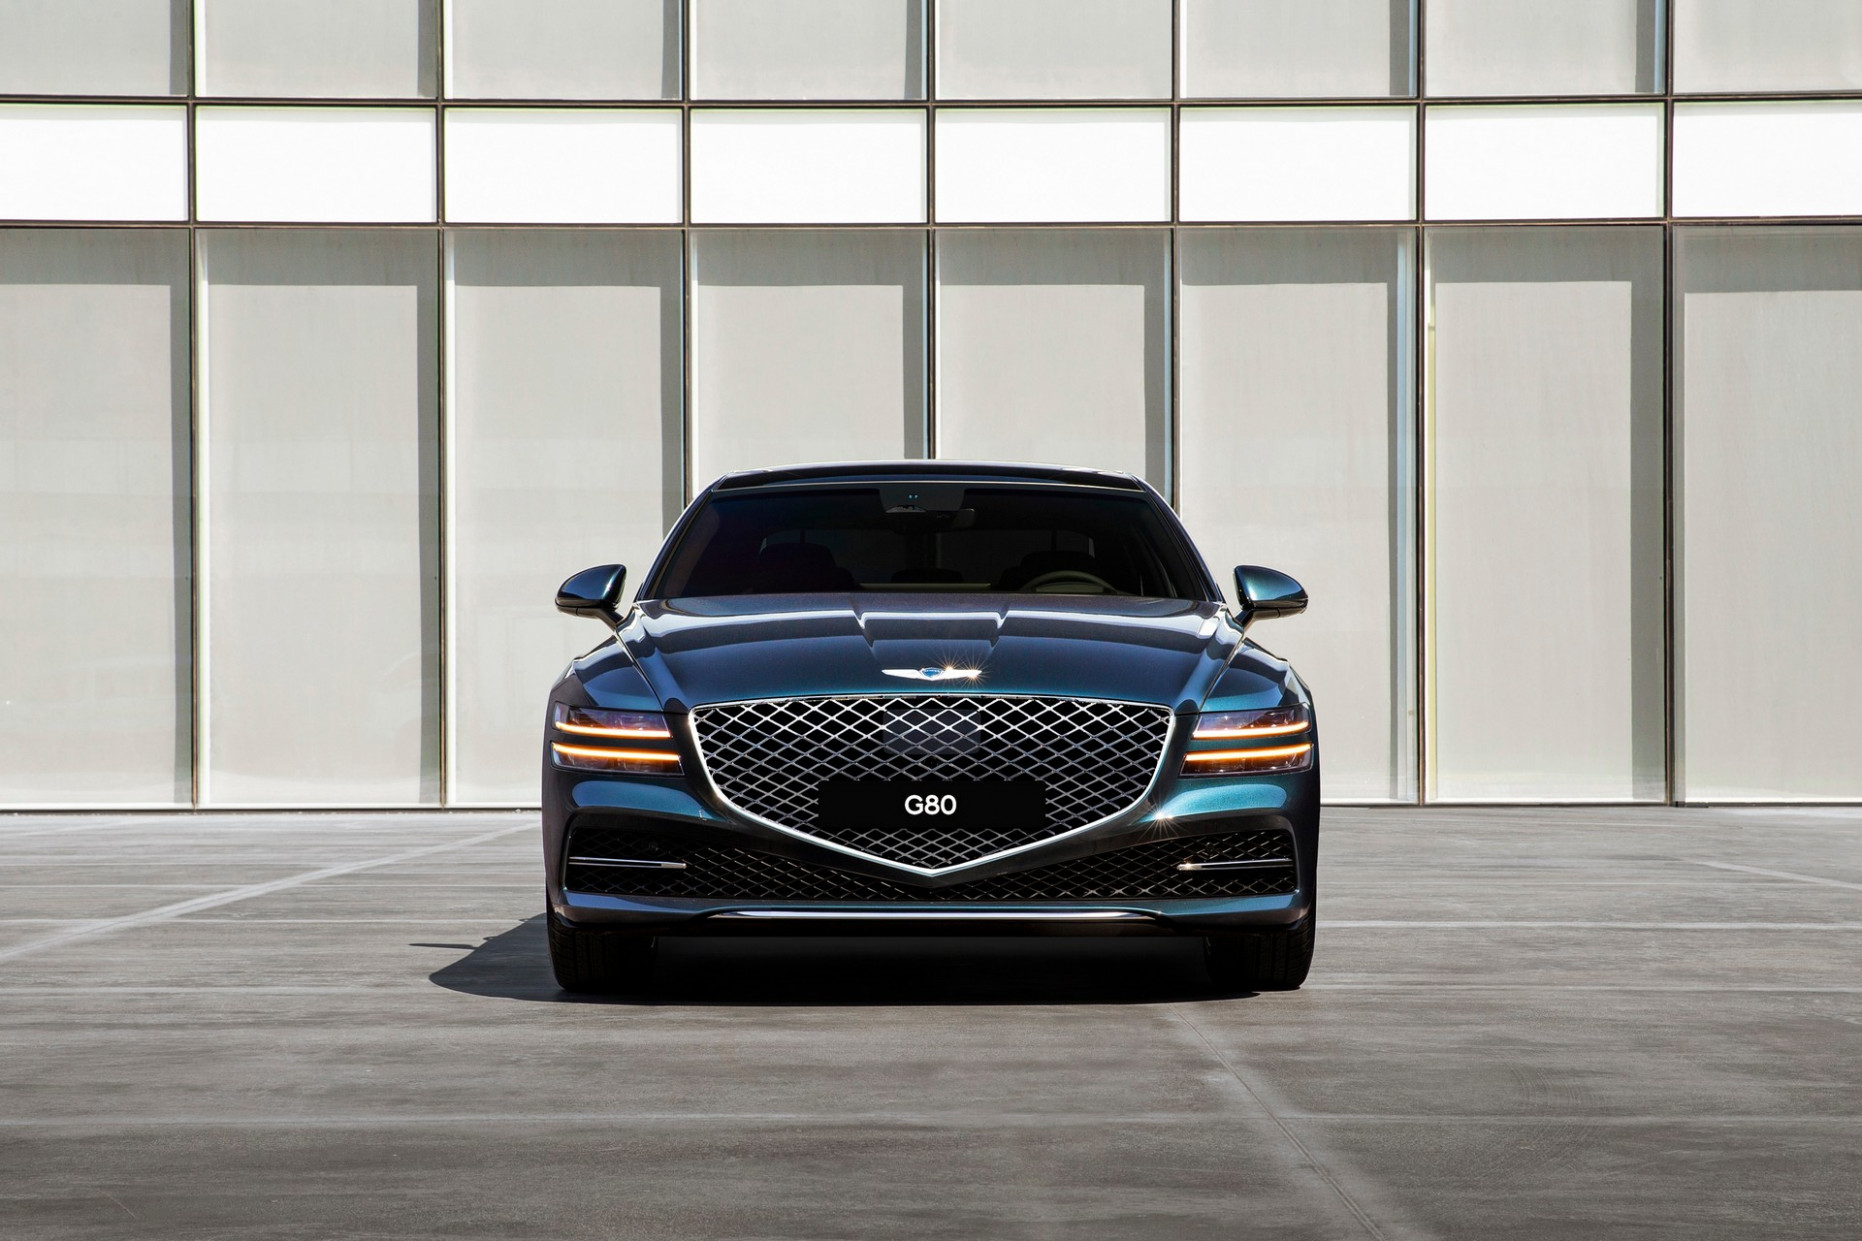 Release Date and Concept Hyundai Genesis G80 2022